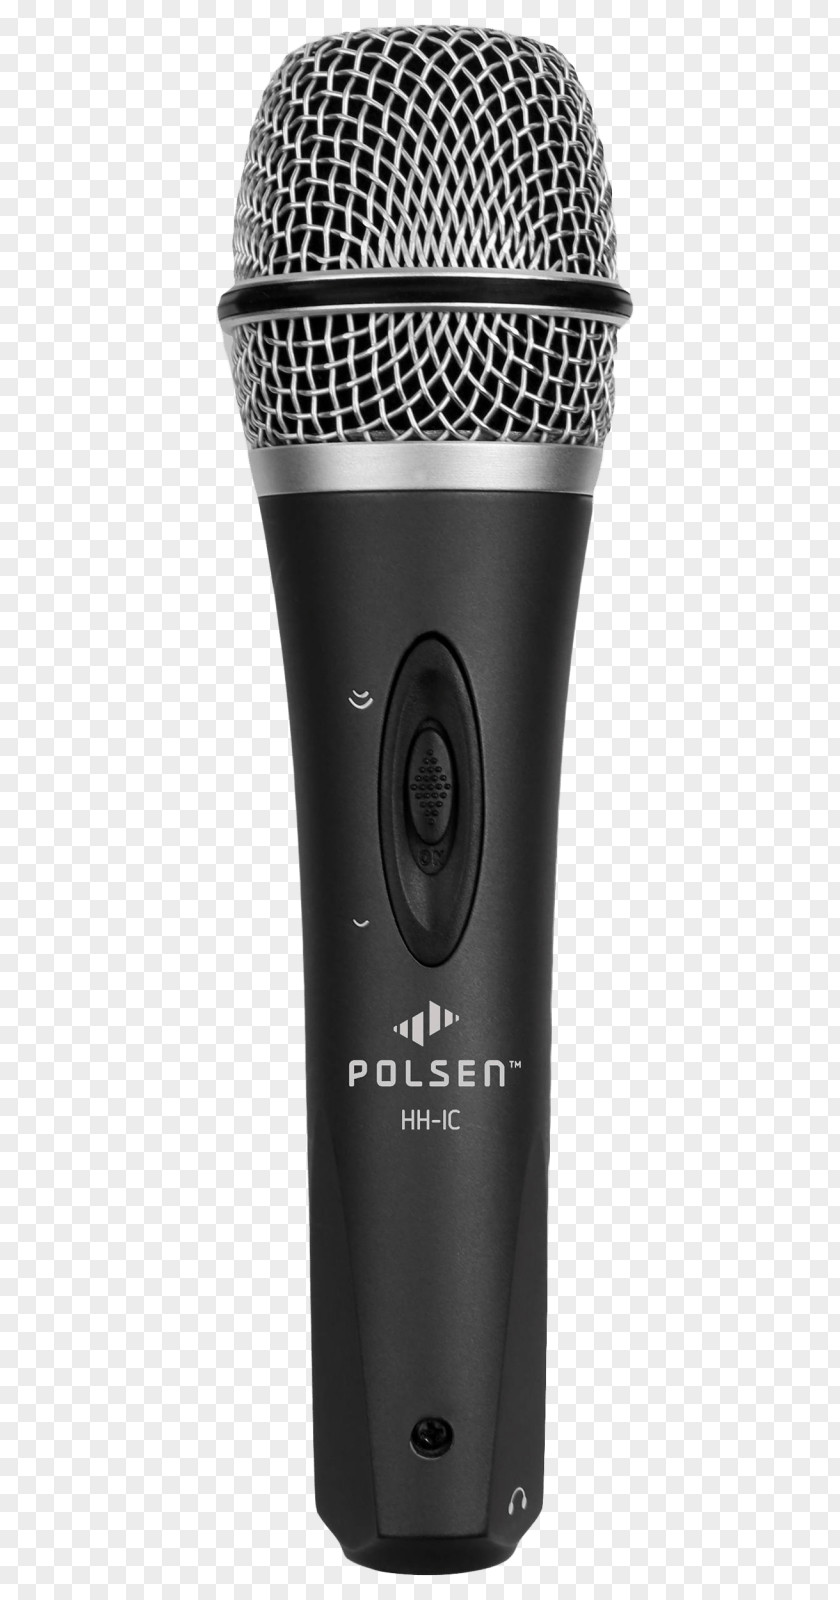 Microphone Clip Art Image Transparency PNG